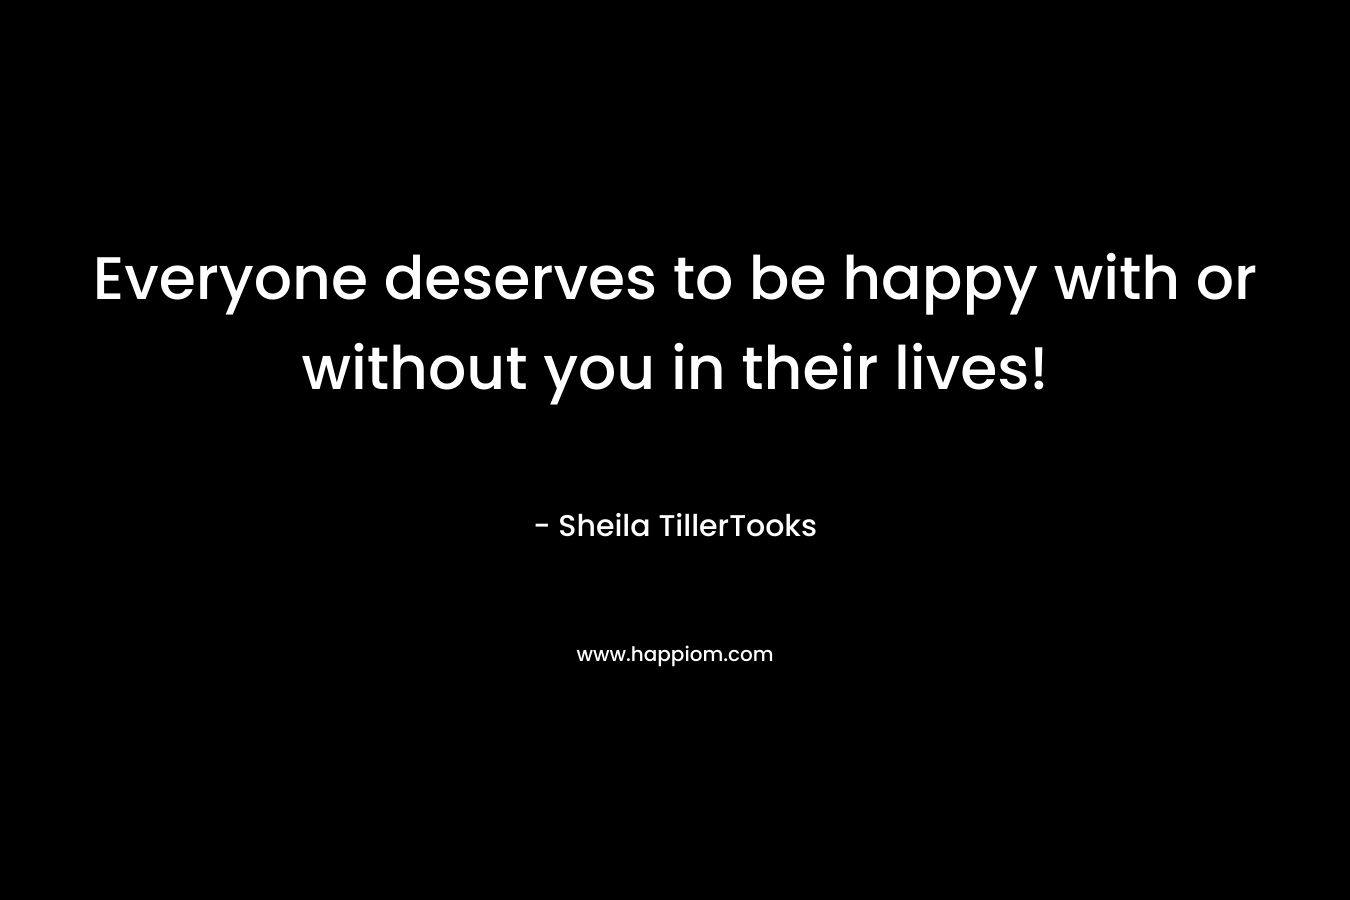 Everyone deserves to be happy with or without you in their lives! – Sheila TillerTooks